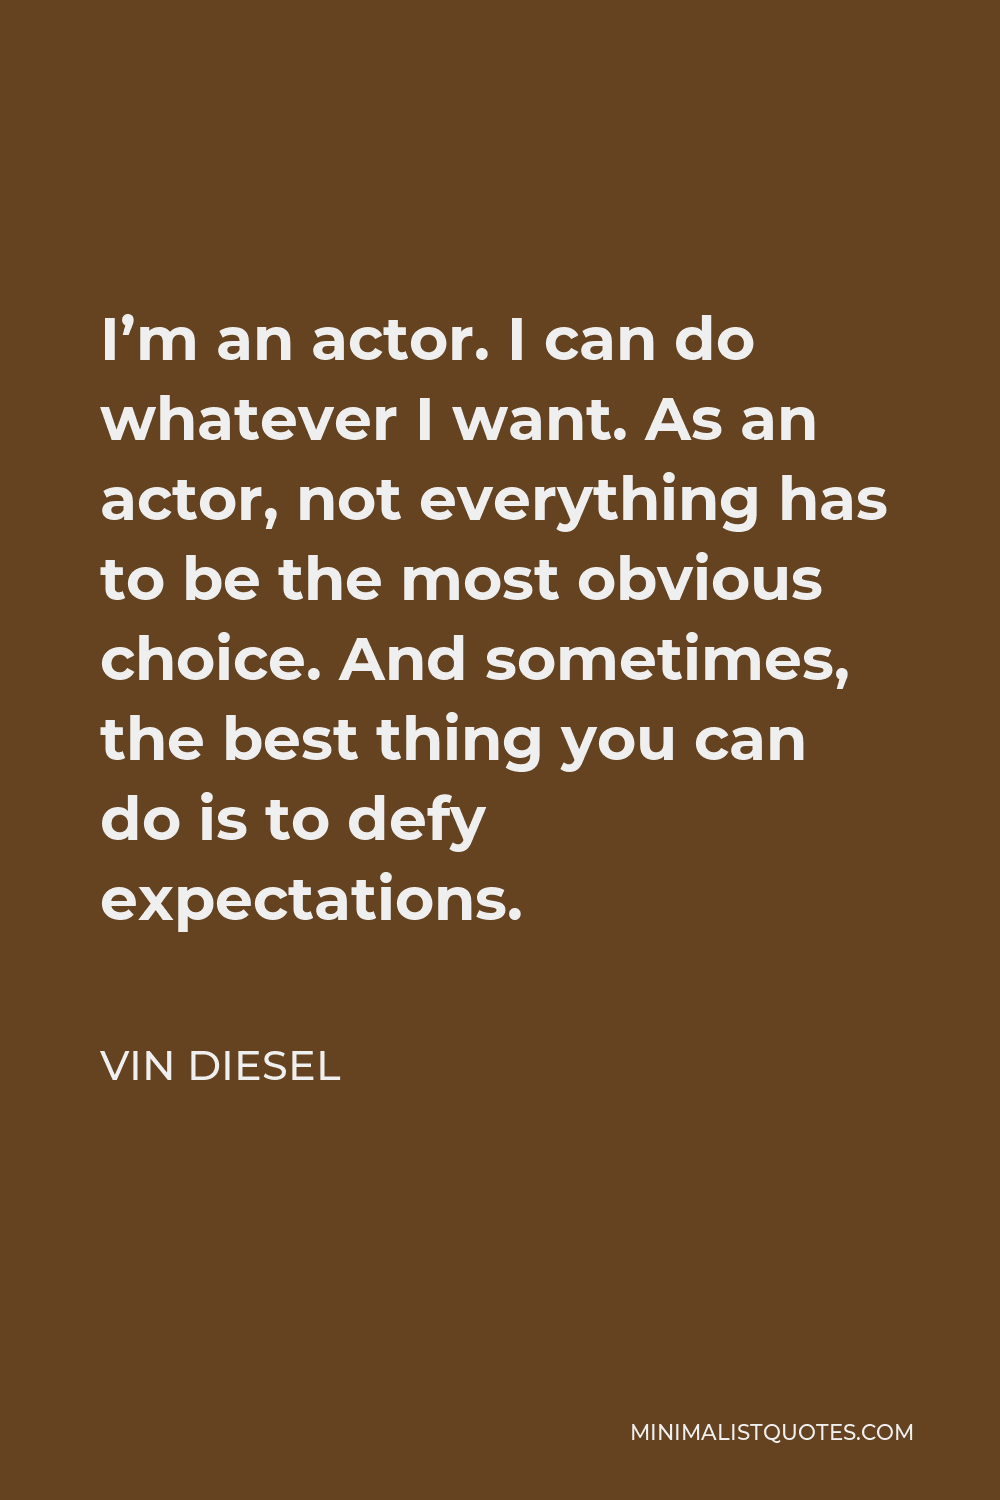 Vin Diesel Quote: I'm an actor. I can do whatever I want. As an